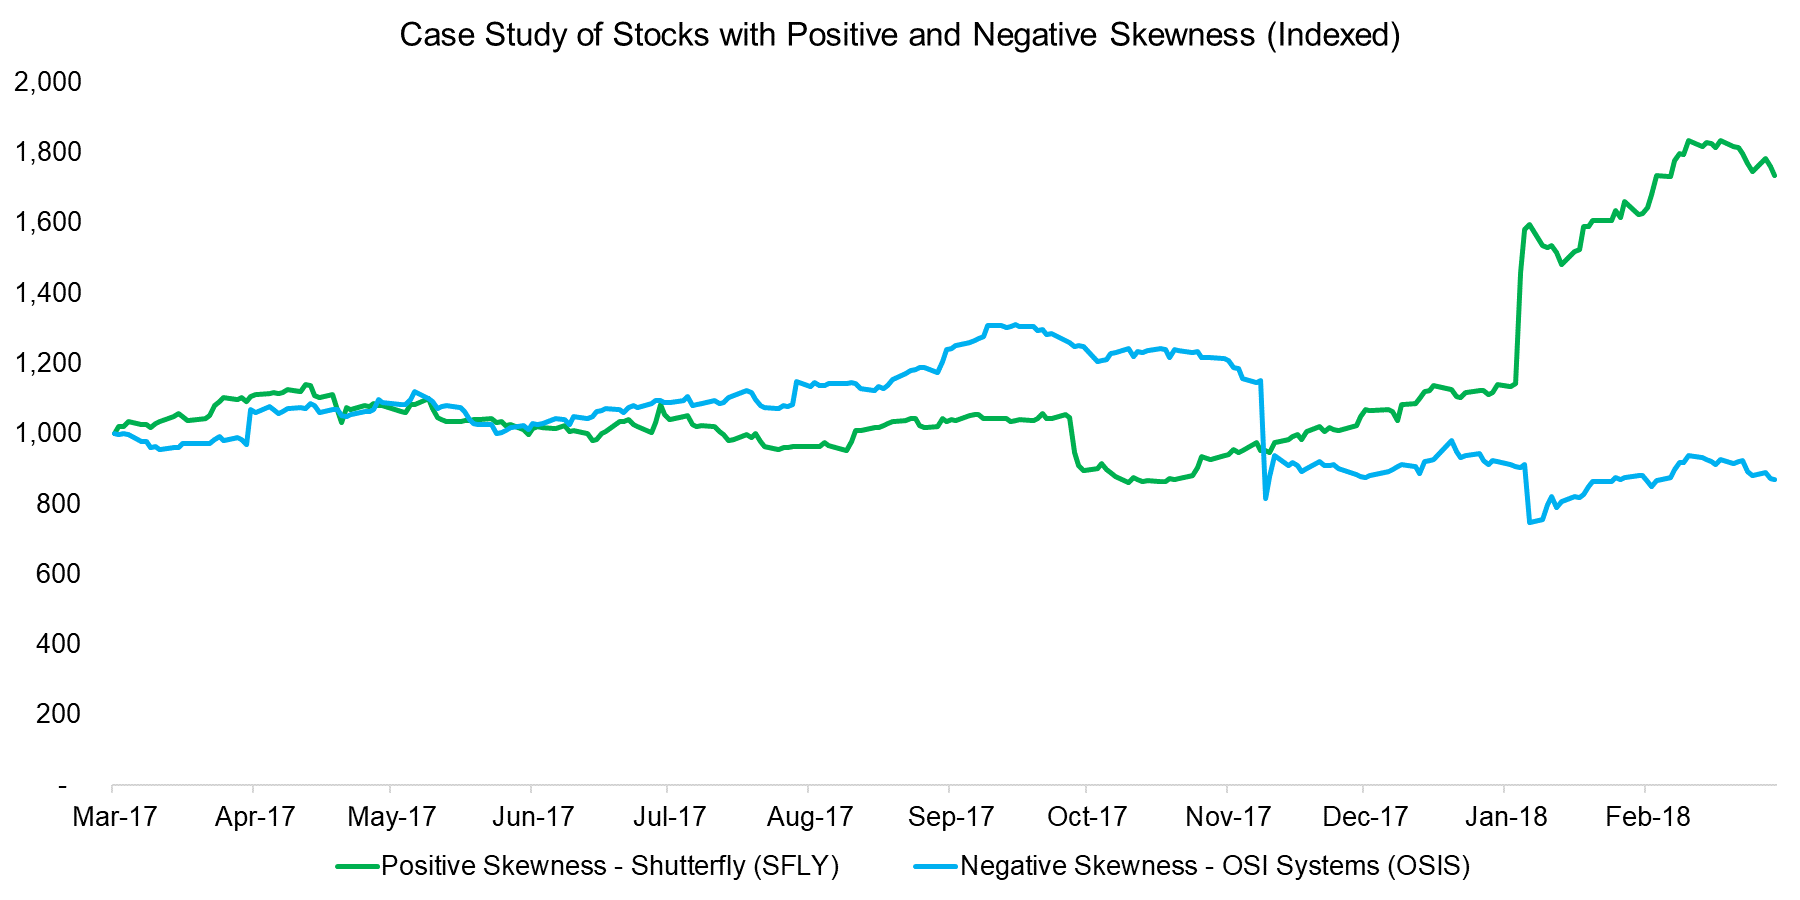 Case Study of Stocks with Positive and Negative Skewness (Indexed)